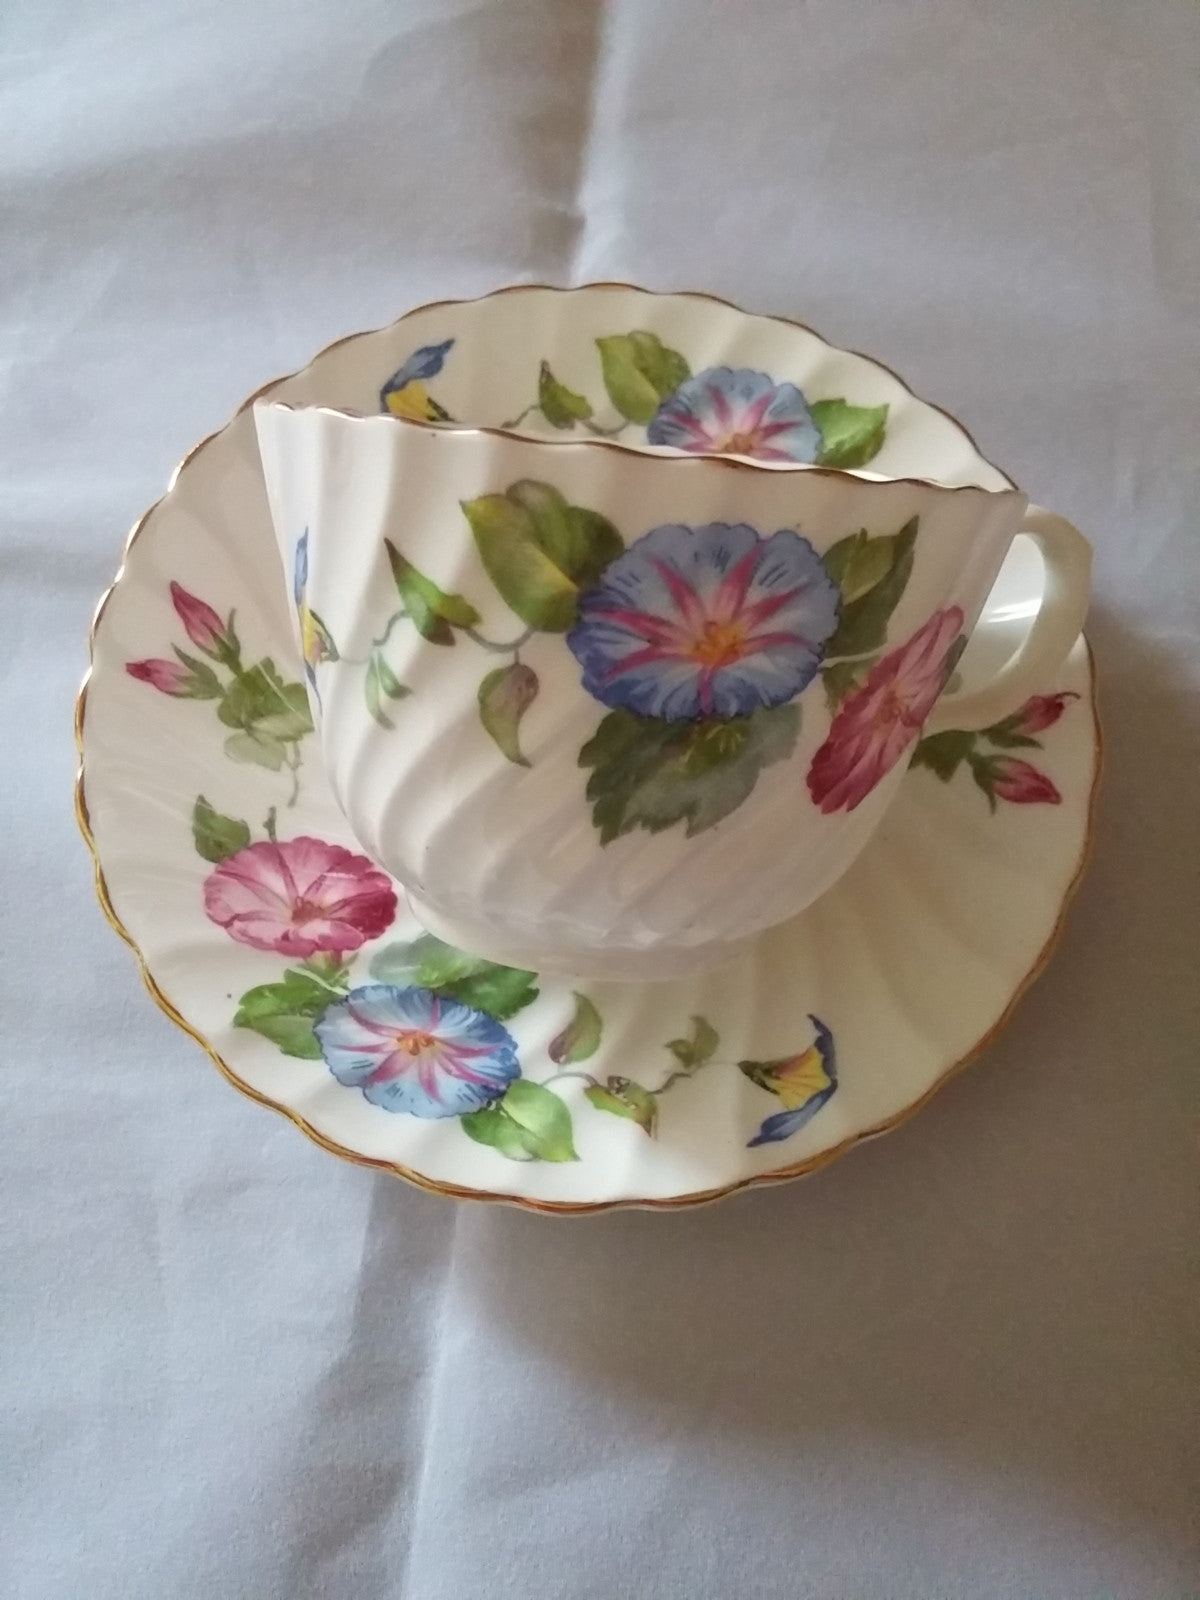 Vintage Aynsley English Bone China Swirl Morning Glory Pattern Tea Cup and Saucer - Dirty 30 Vintage | Vintage Clothing, Vintage Jewelry, Vintage Accessories